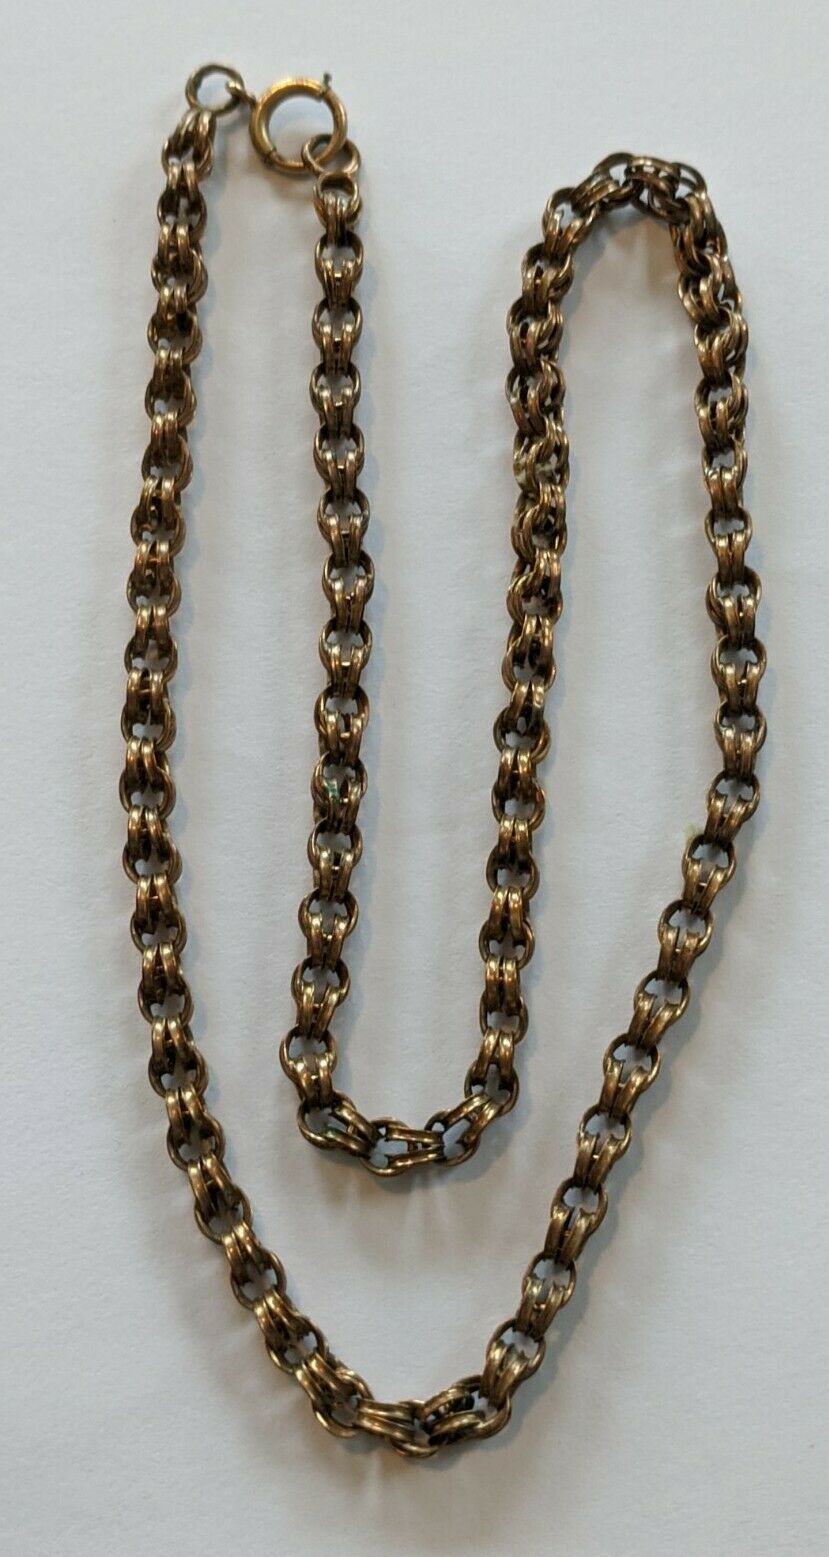 Antique Victorian Gold Filled Double Link Chain Necklace 18 1/2" Long